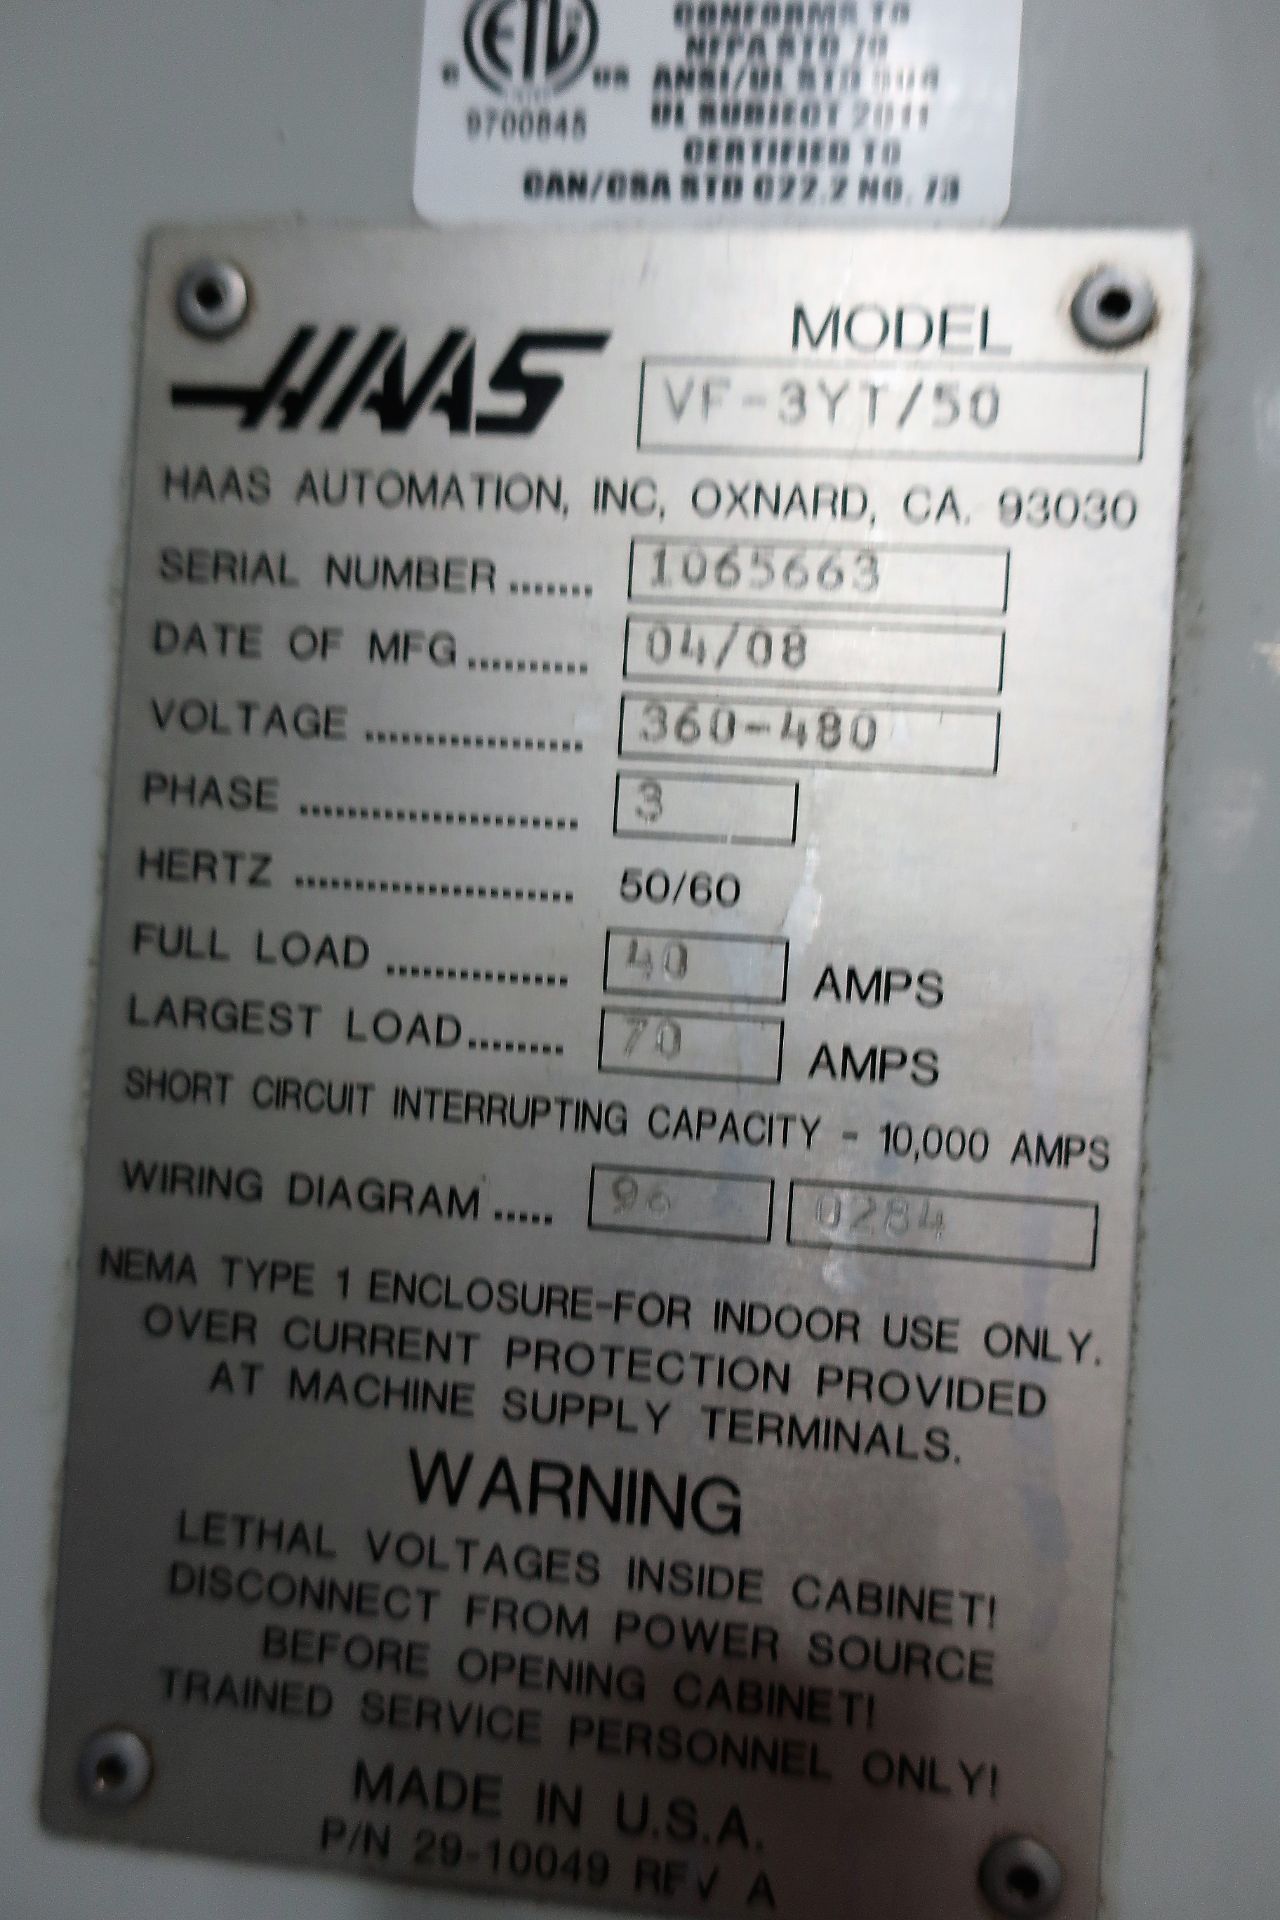 2008 HAAS MODEL VF-3YT/50 CNC VERTICAL MACHINING CENTER, SN 1065663 - Image 11 of 11